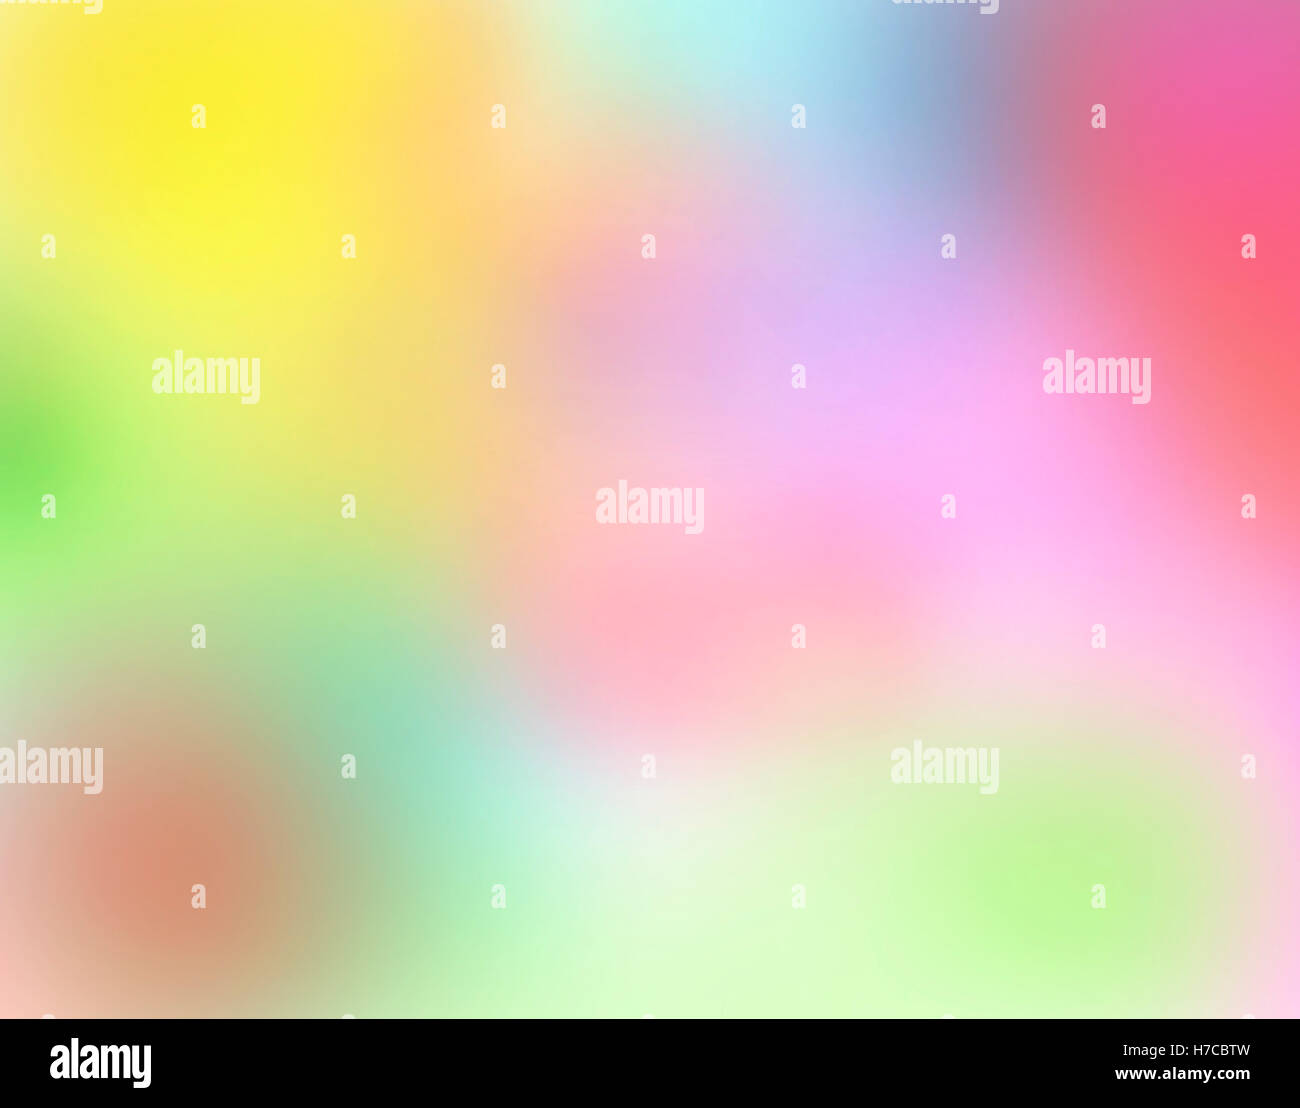 Assorted colors abstract blurred background. Stock Photo